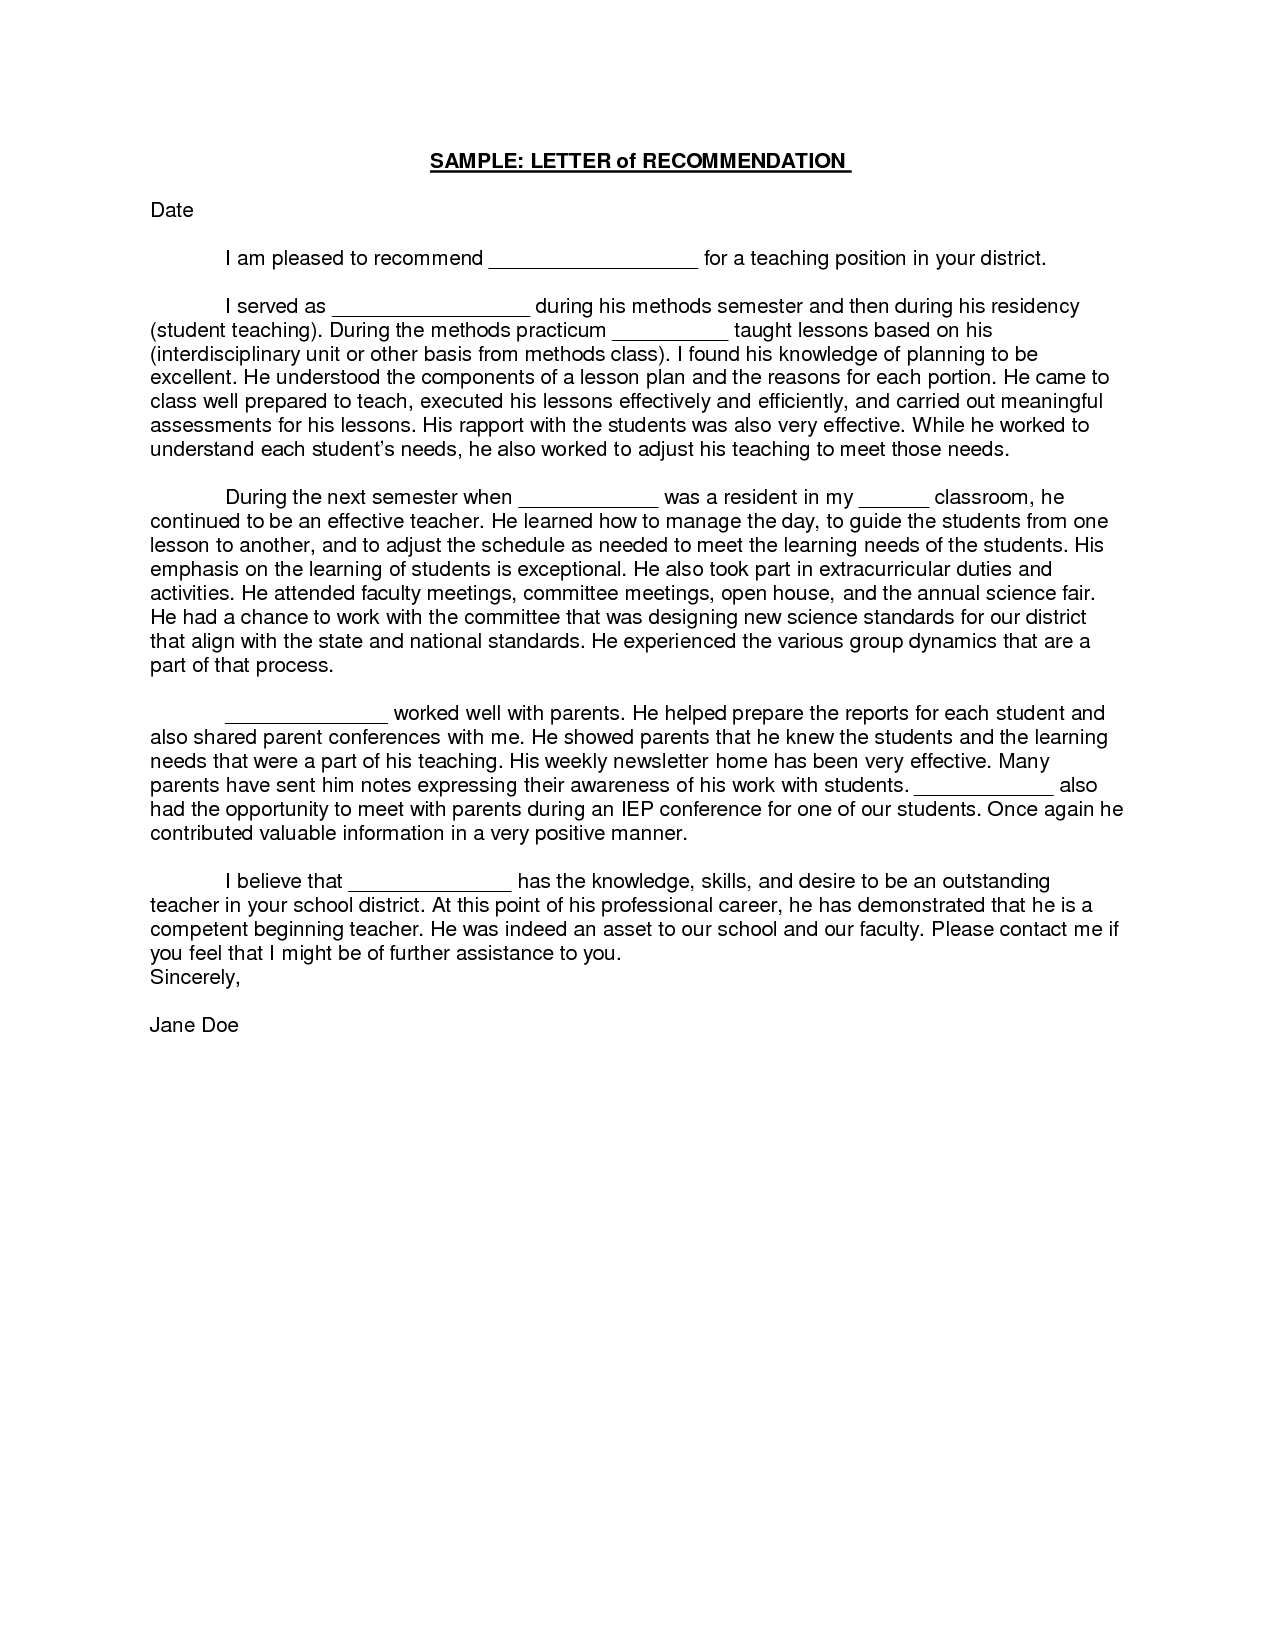 Teacher Recommendation Letter A Letter Of Recommendation with regard to measurements 1275 X 1650